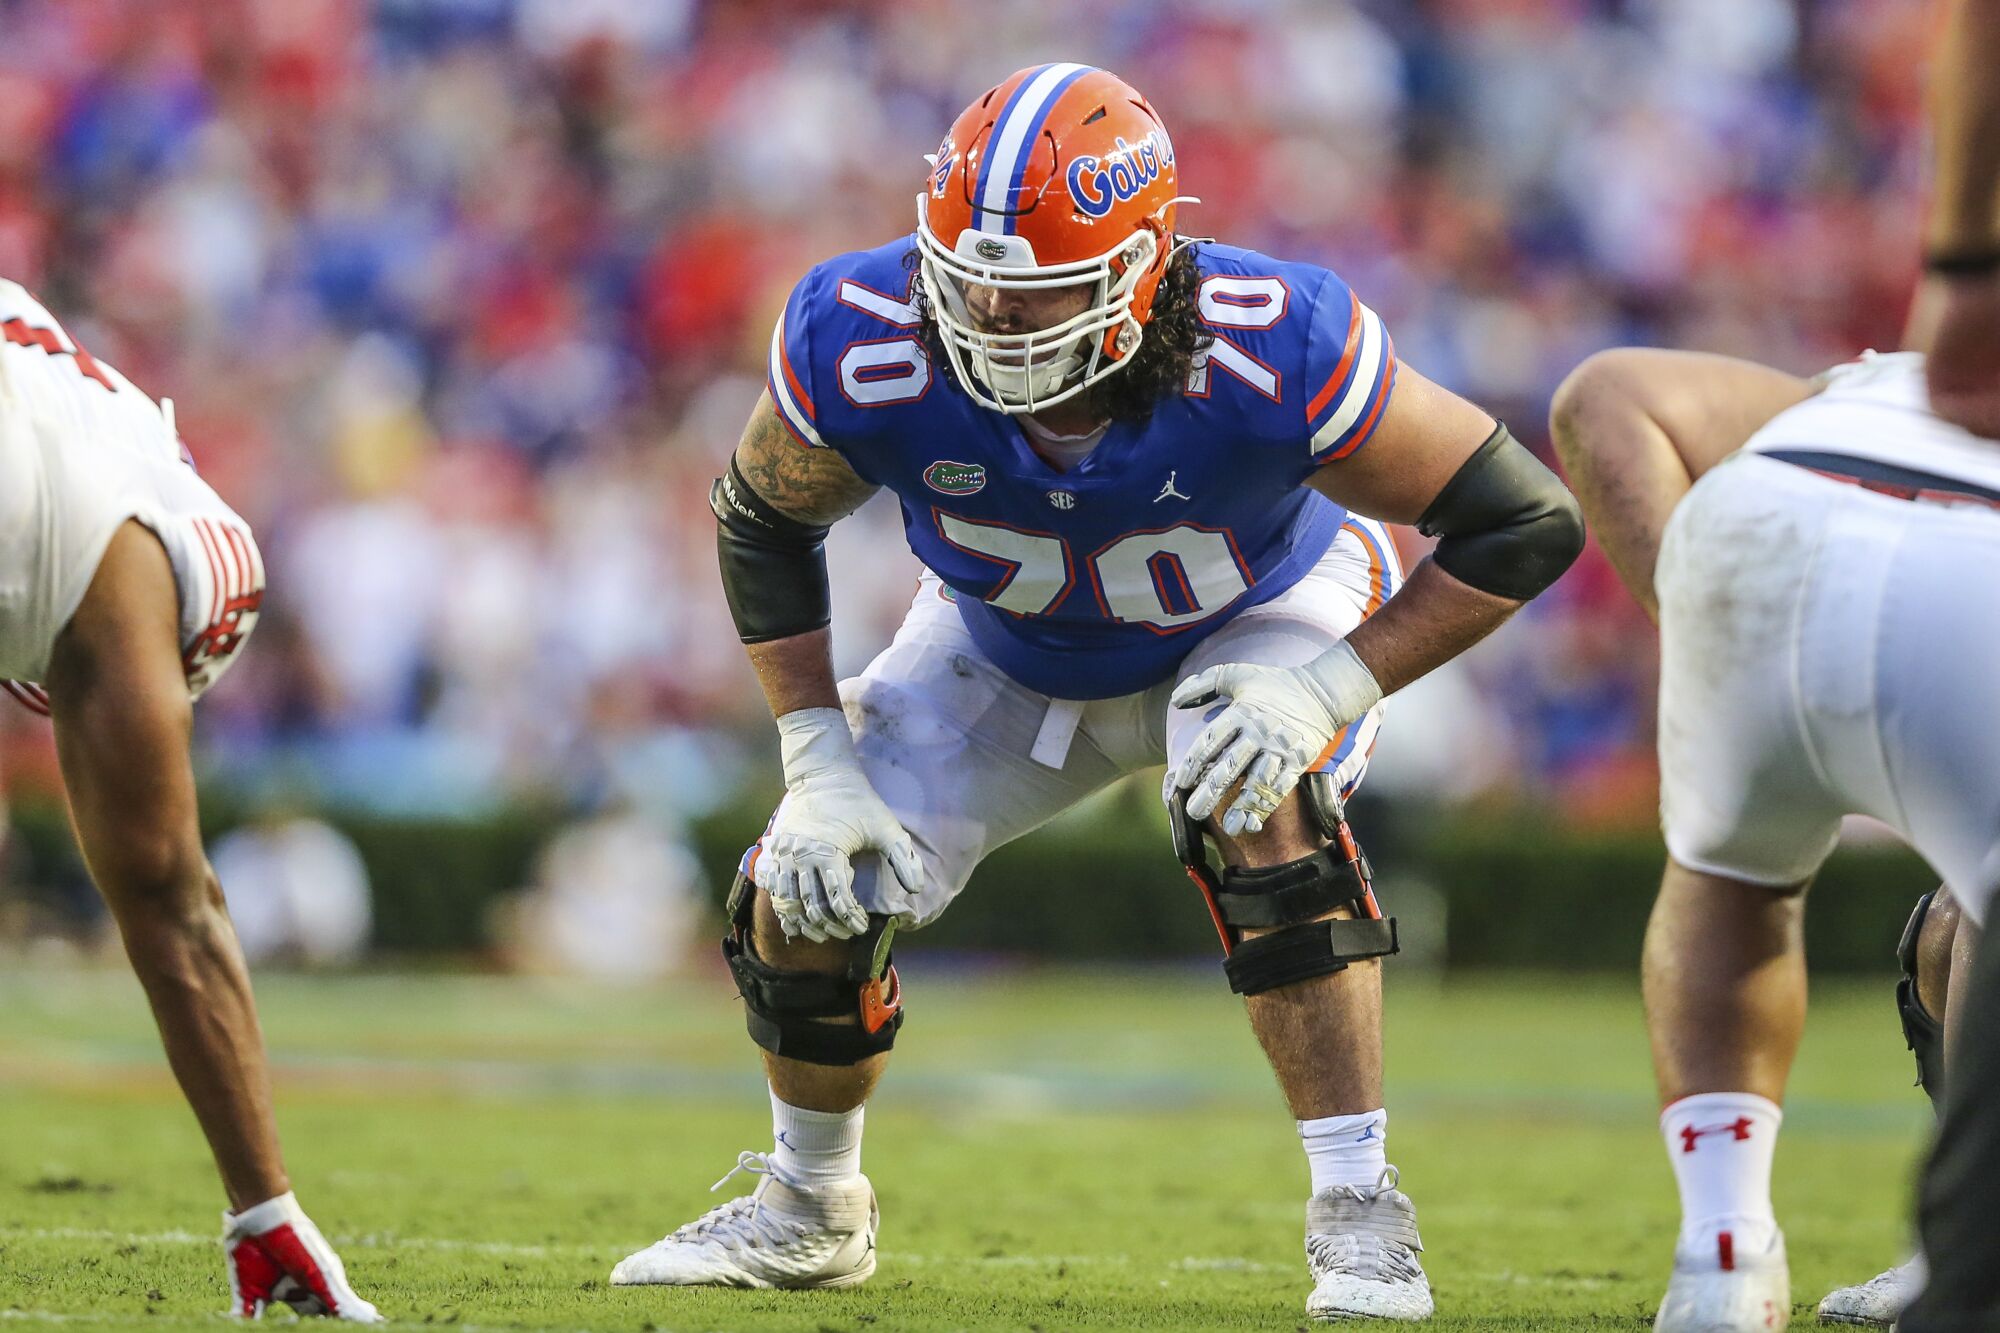 Florida offensive lineman Michael Tarquin waits for the snap.